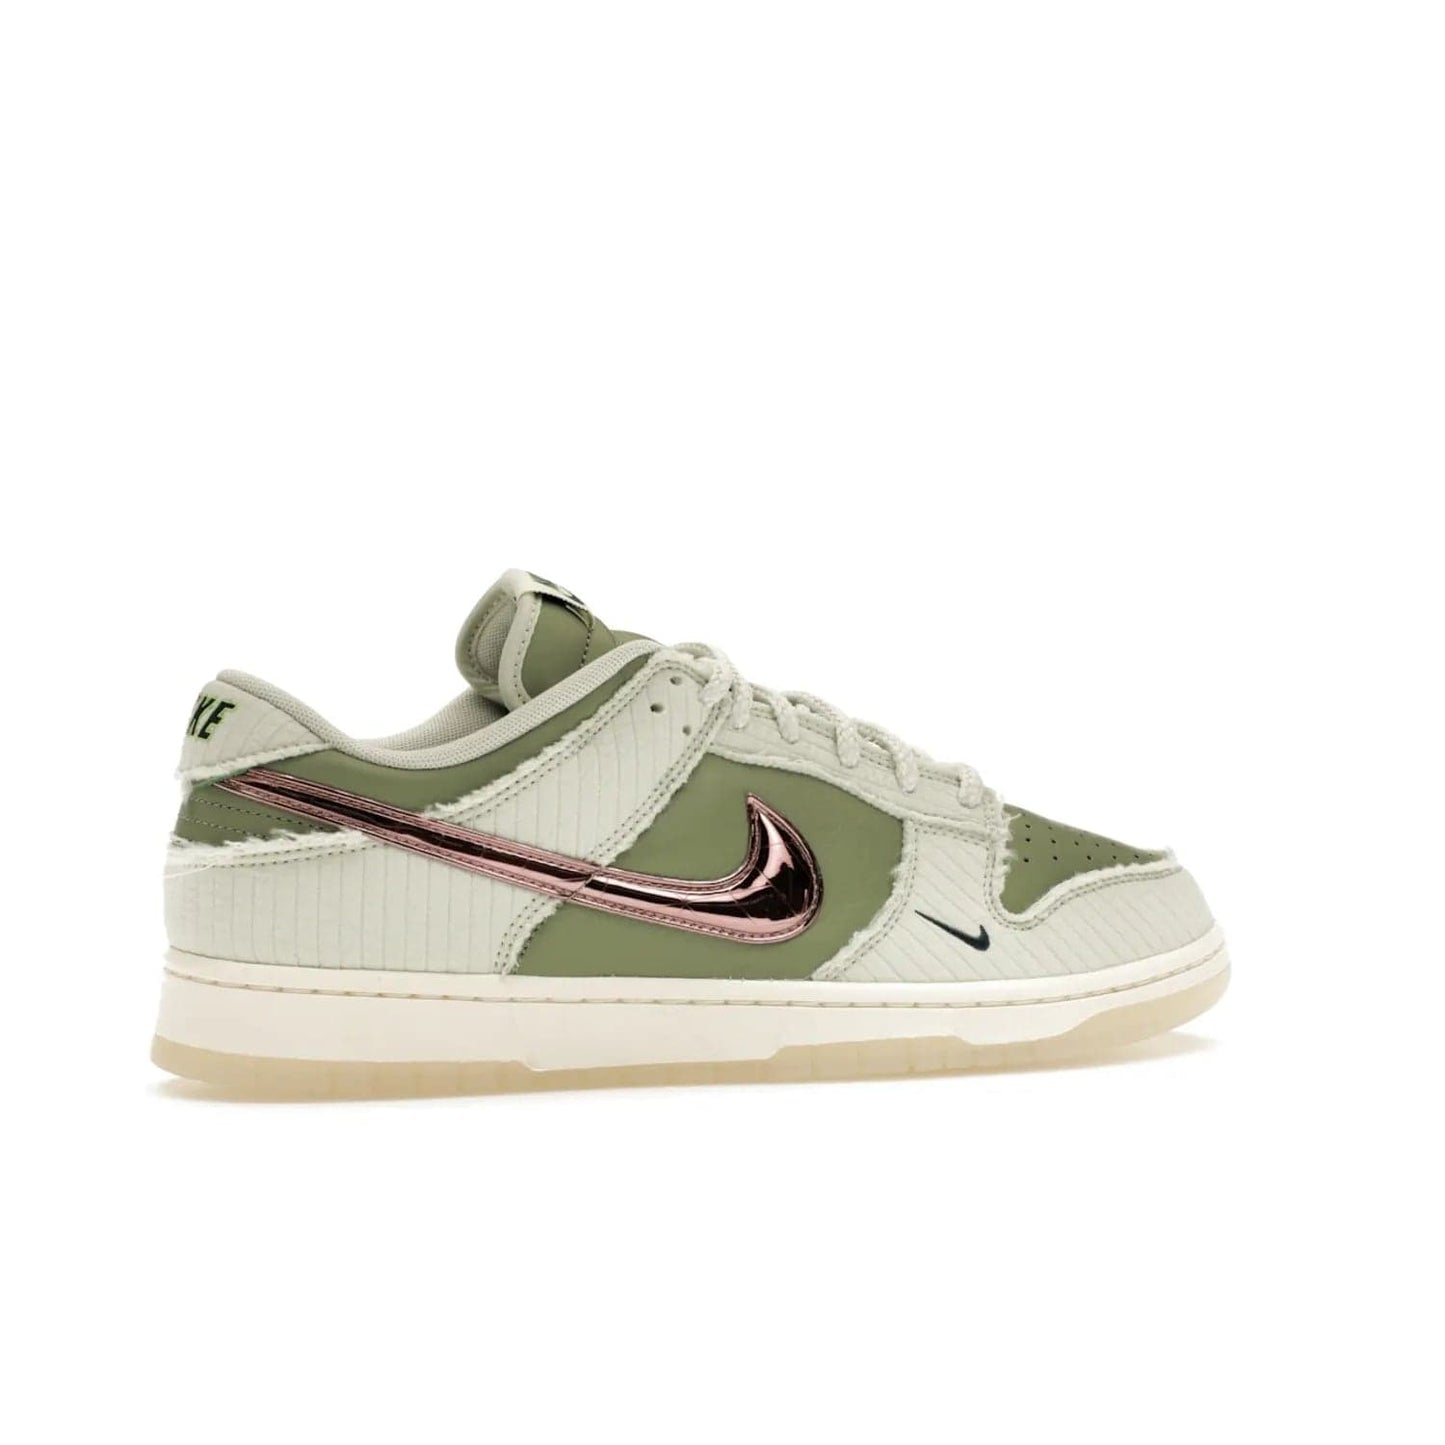 Nike Dunk Low Retro PRM Kyler Murray Be 1 of One - Image 35 - Only at www.BallersClubKickz.com - Introducing the Nike Dunk Low Retro PRM Kyler Murray "Be 1 of One"! A Sea Glass upper with Sail and Oil Green accents, finished with Rose Gold accents. Drop date: November 10th.